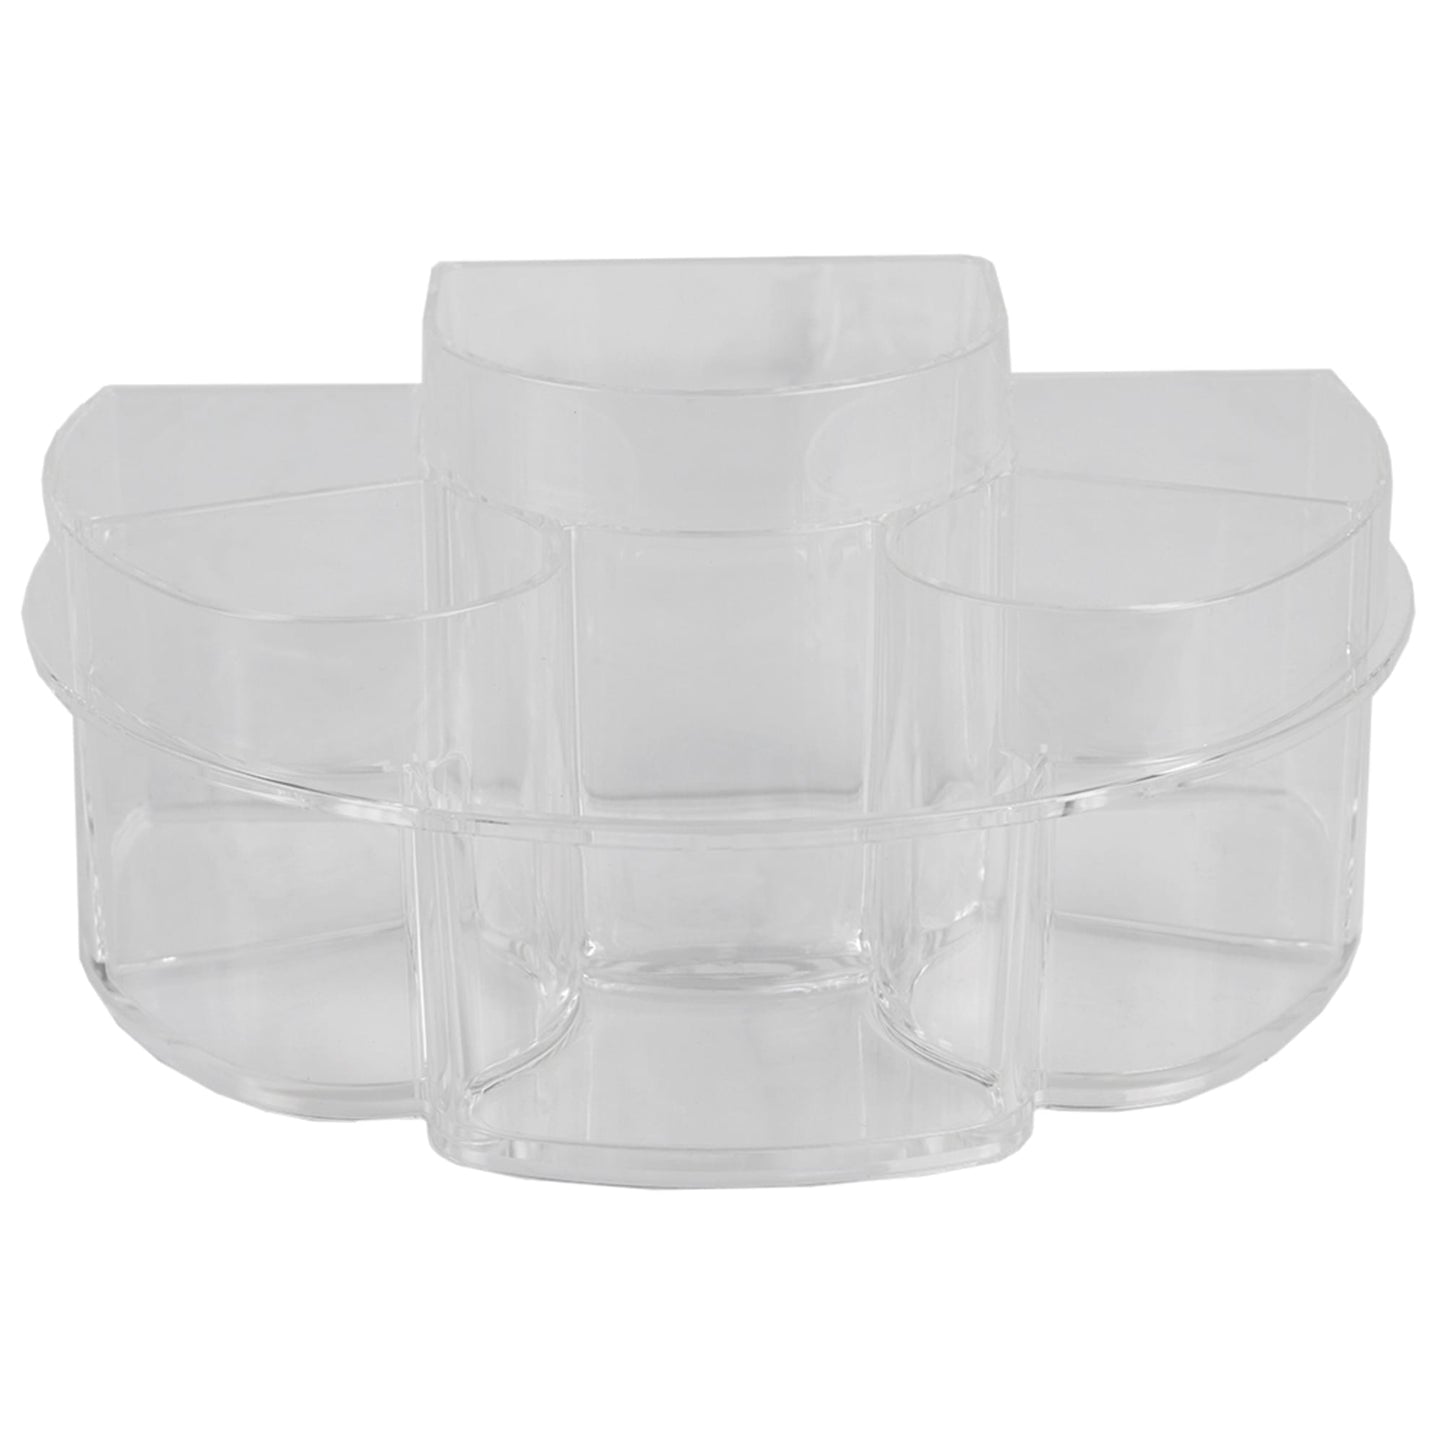 Half Moon Shatter-Resistant Plastic Cosmetic Organizer, Clear